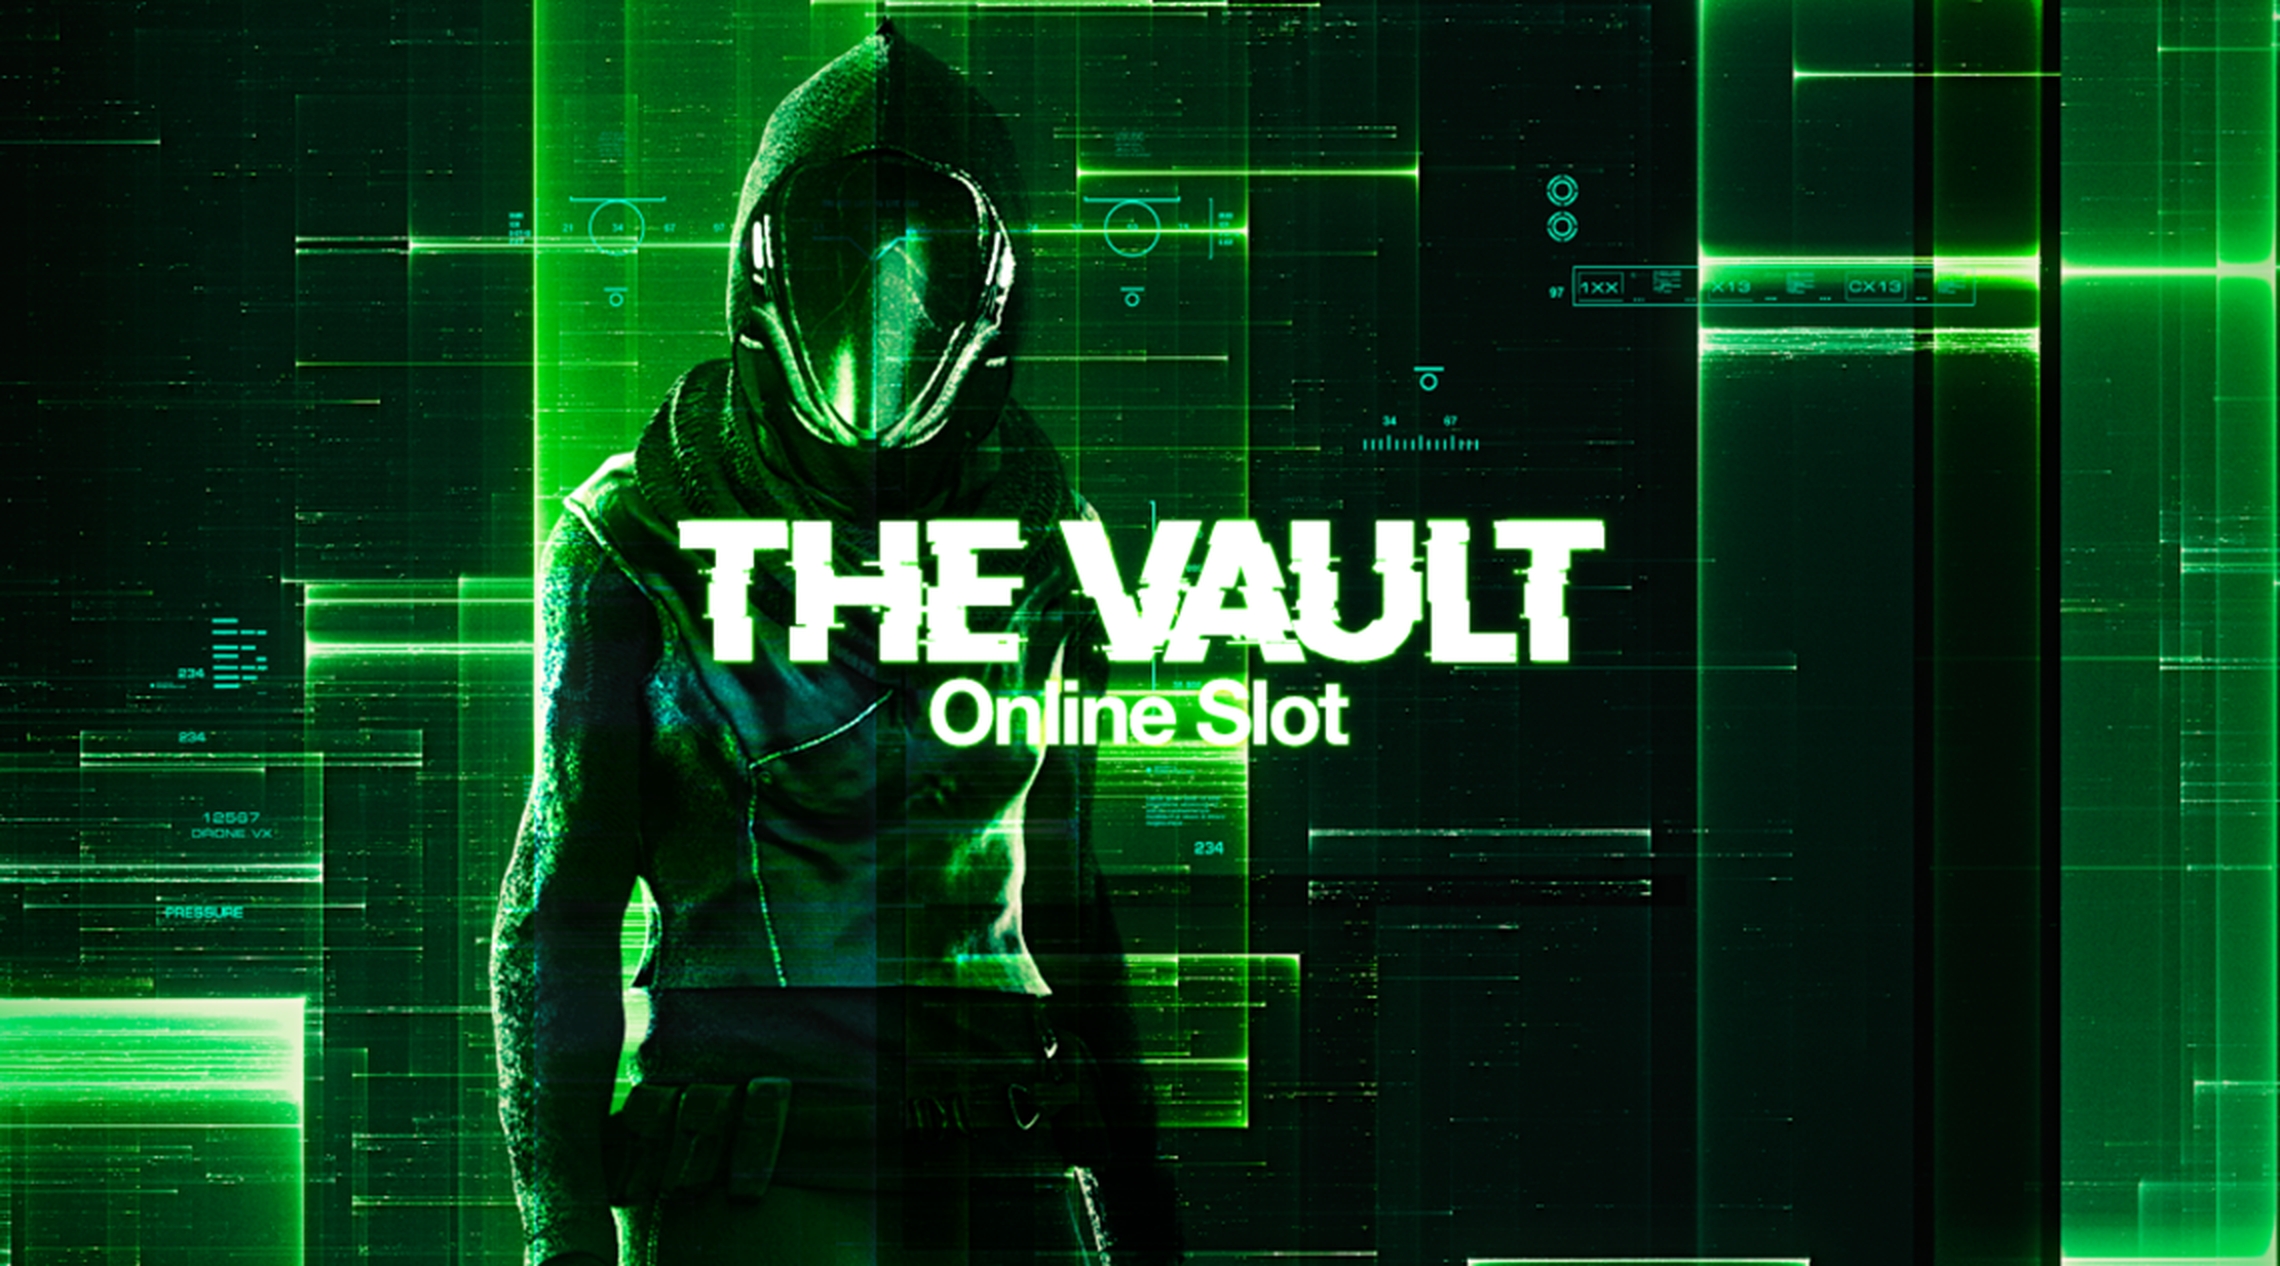 The The Vault Online Slot Demo Game by Snowborn Games